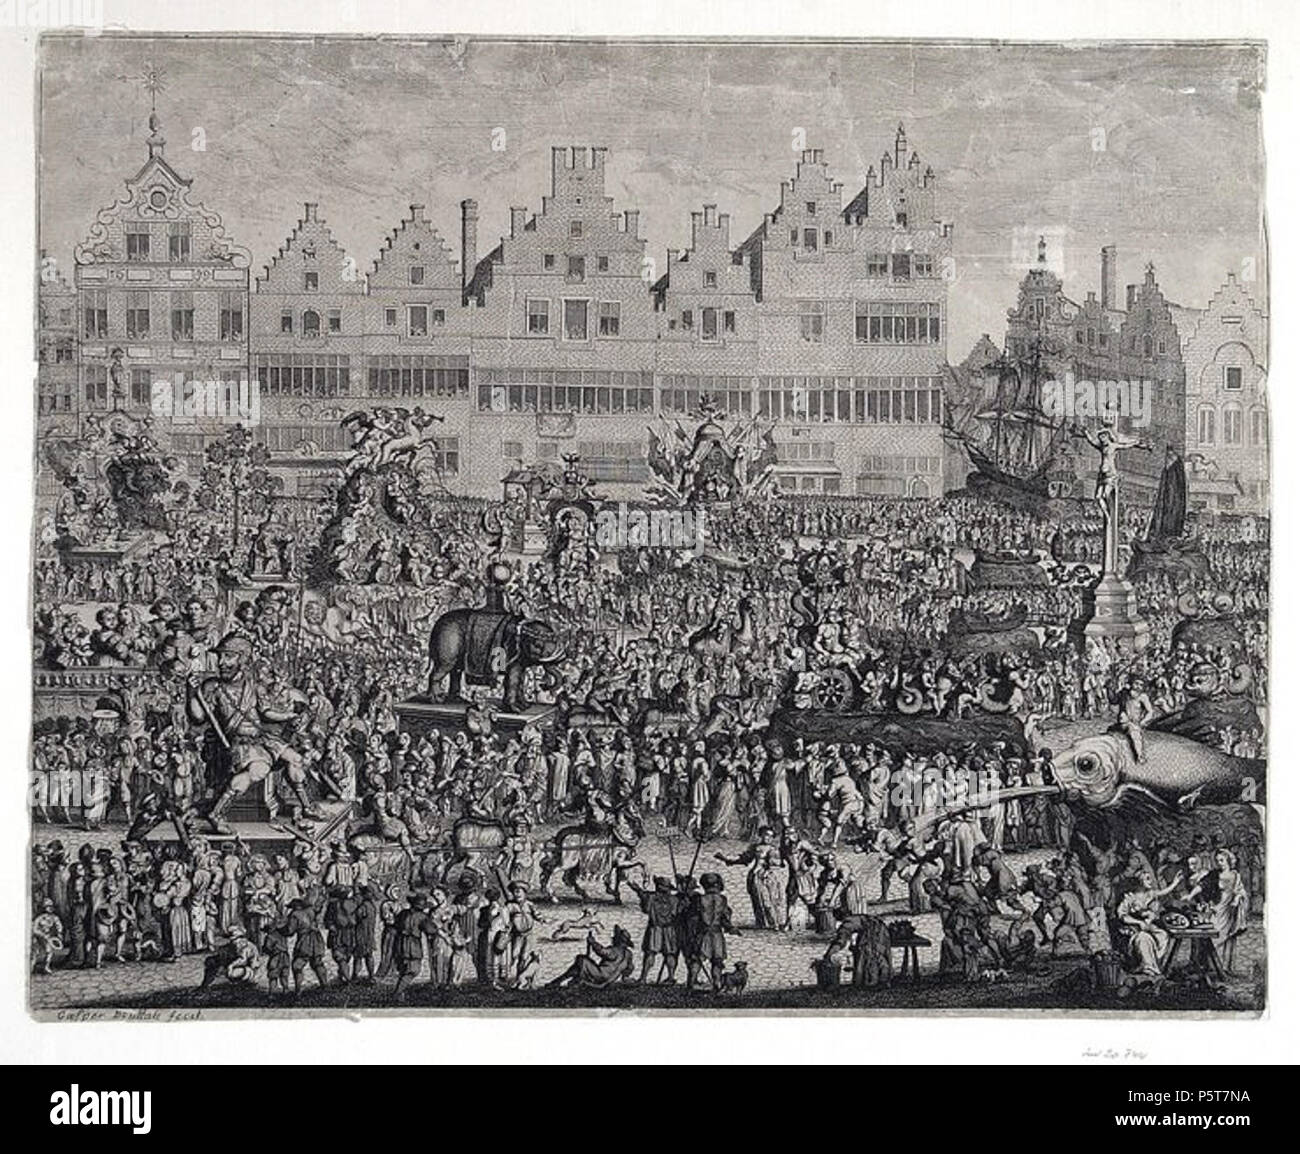 N/A. English: The Ommegang on the Meir, Antwerp. Print by Gaspar Bouttats, 1685, published by Hieronymus Verdussen III . 26 August 2011. Gaspar Bouttats 425 De Ommegang op de Meir - Gaspar Bouttats Stock Photo